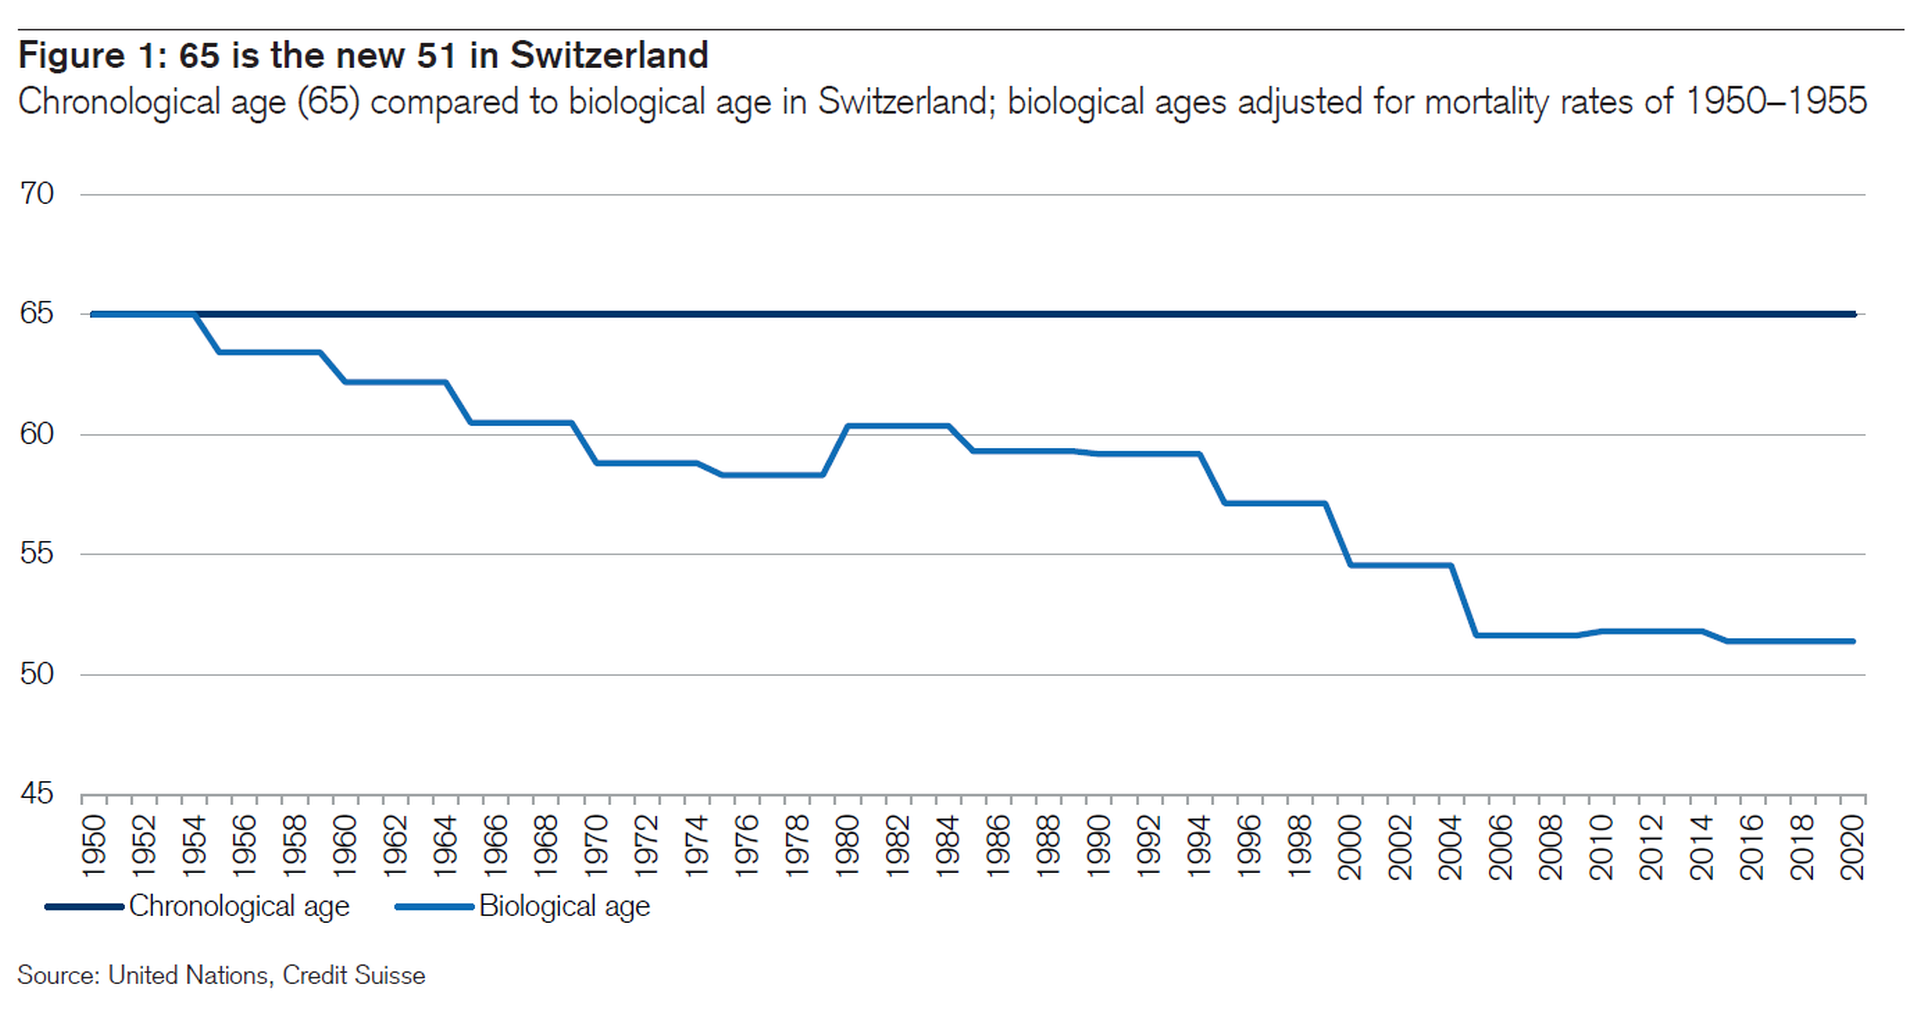 Swiss pension provision: Retired people feel younger and younger